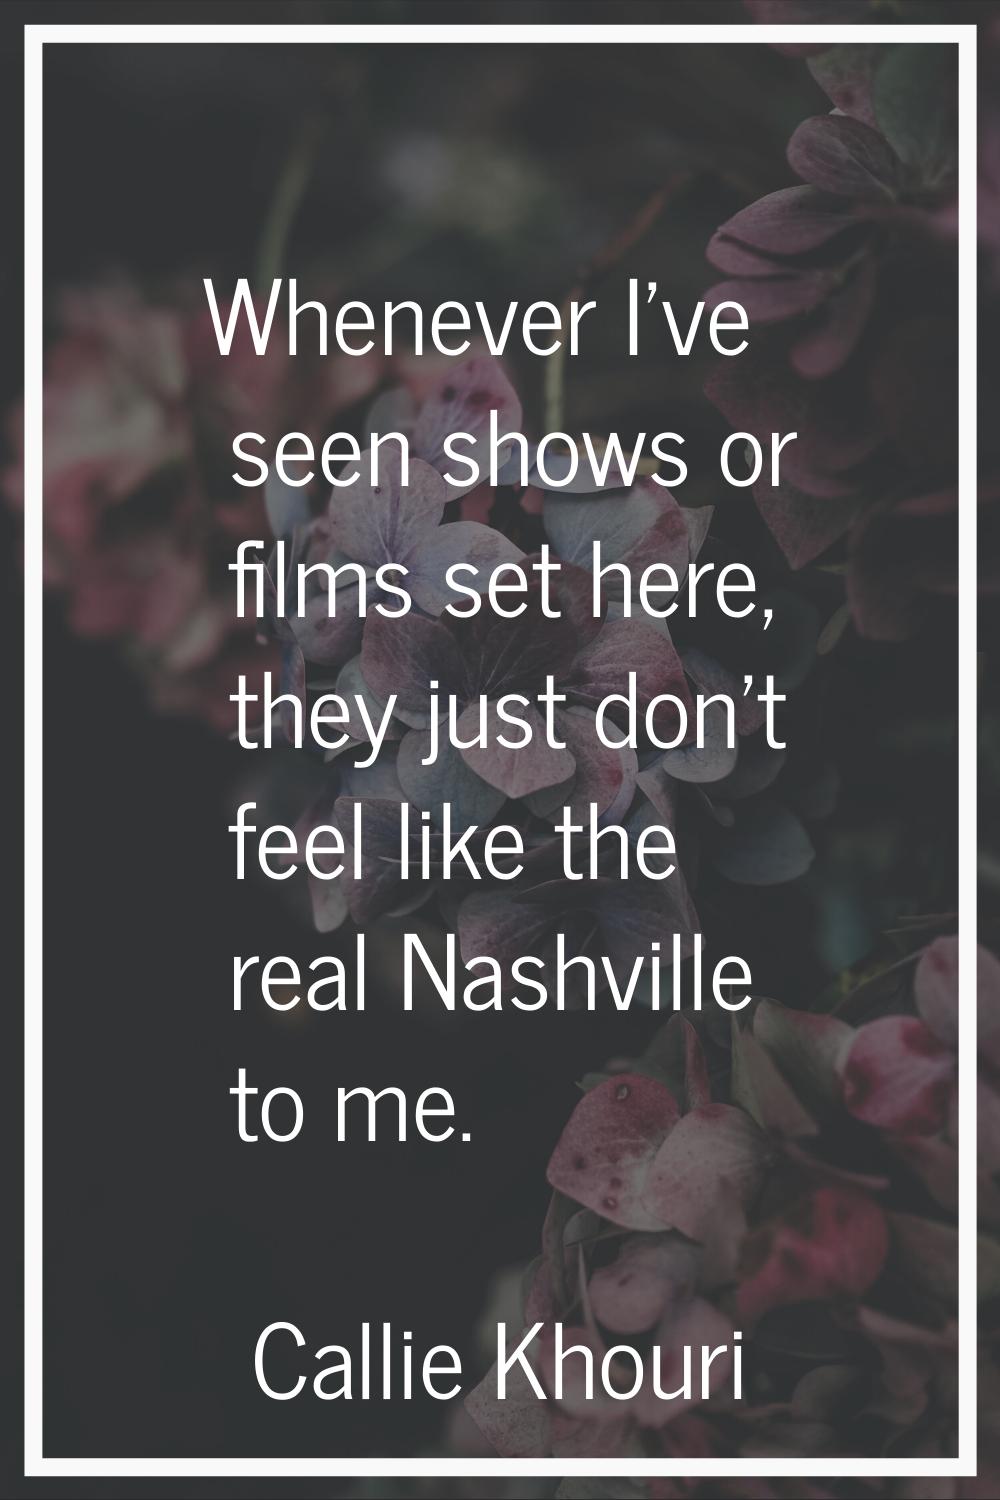 Whenever I've seen shows or films set here, they just don't feel like the real Nashville to me.